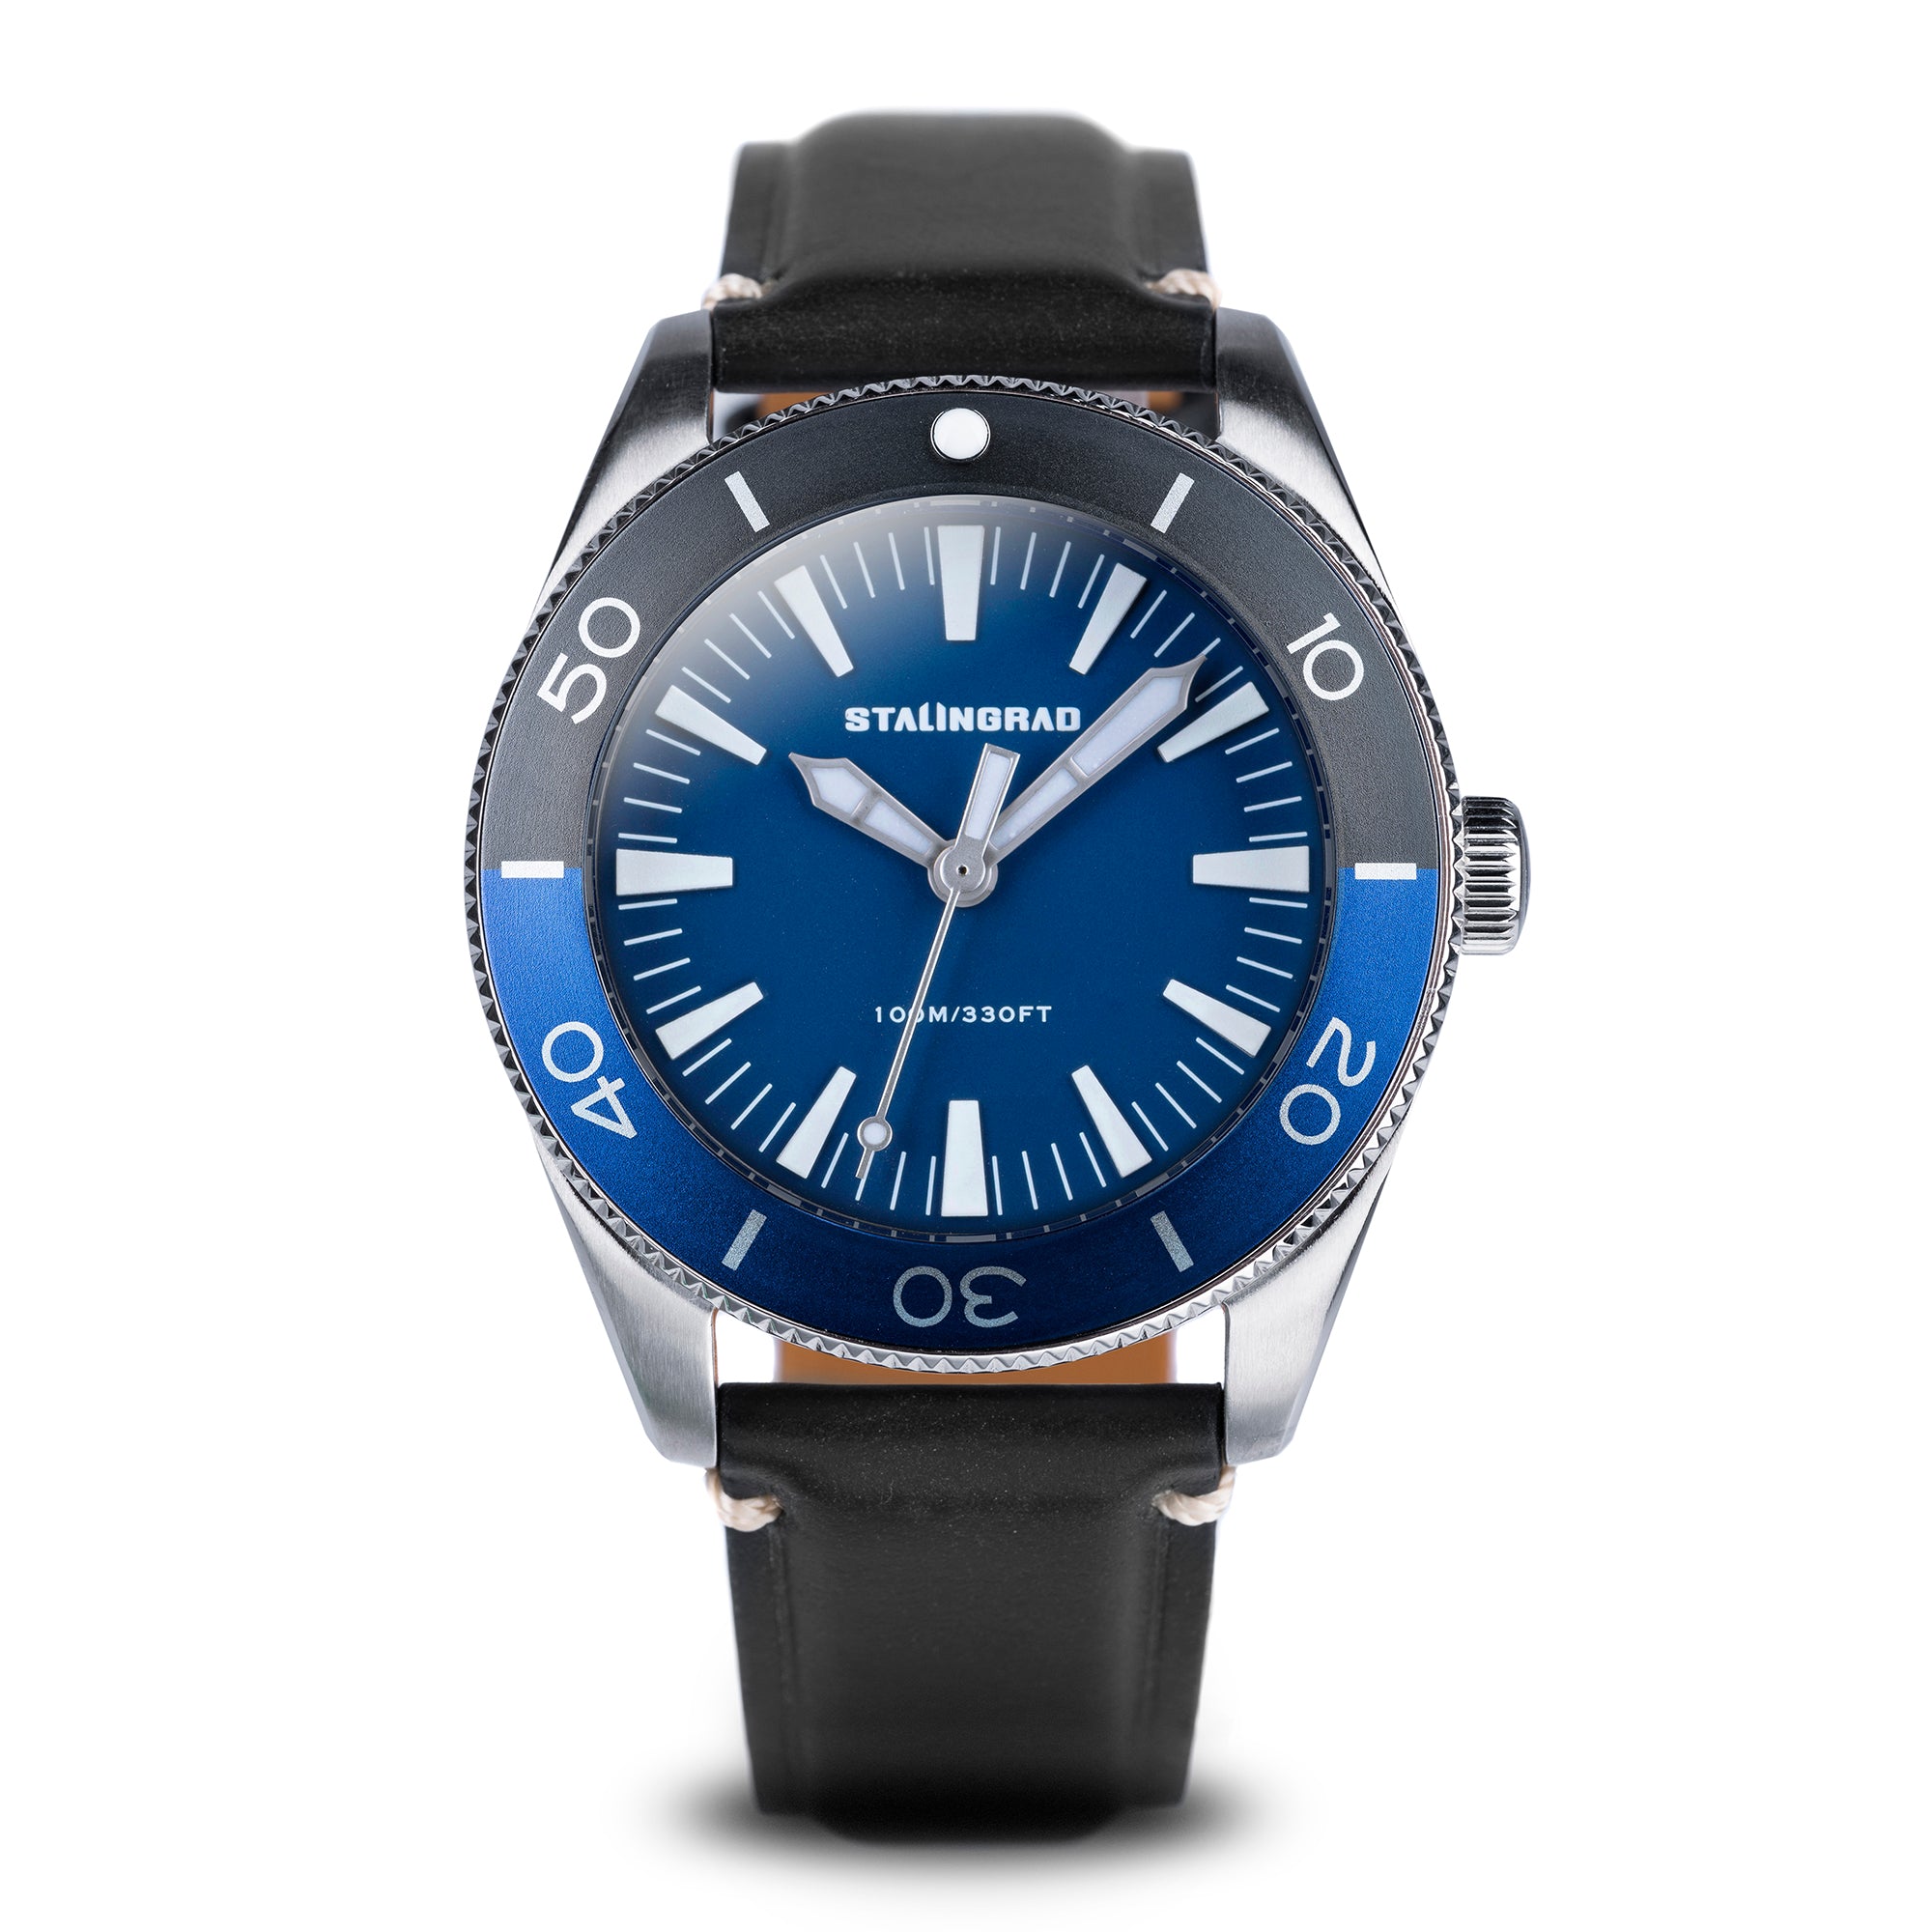 Stalingrad Iron Will Watch Blue Dial, with Black and blue 2 tone Bezel on a white background, front view